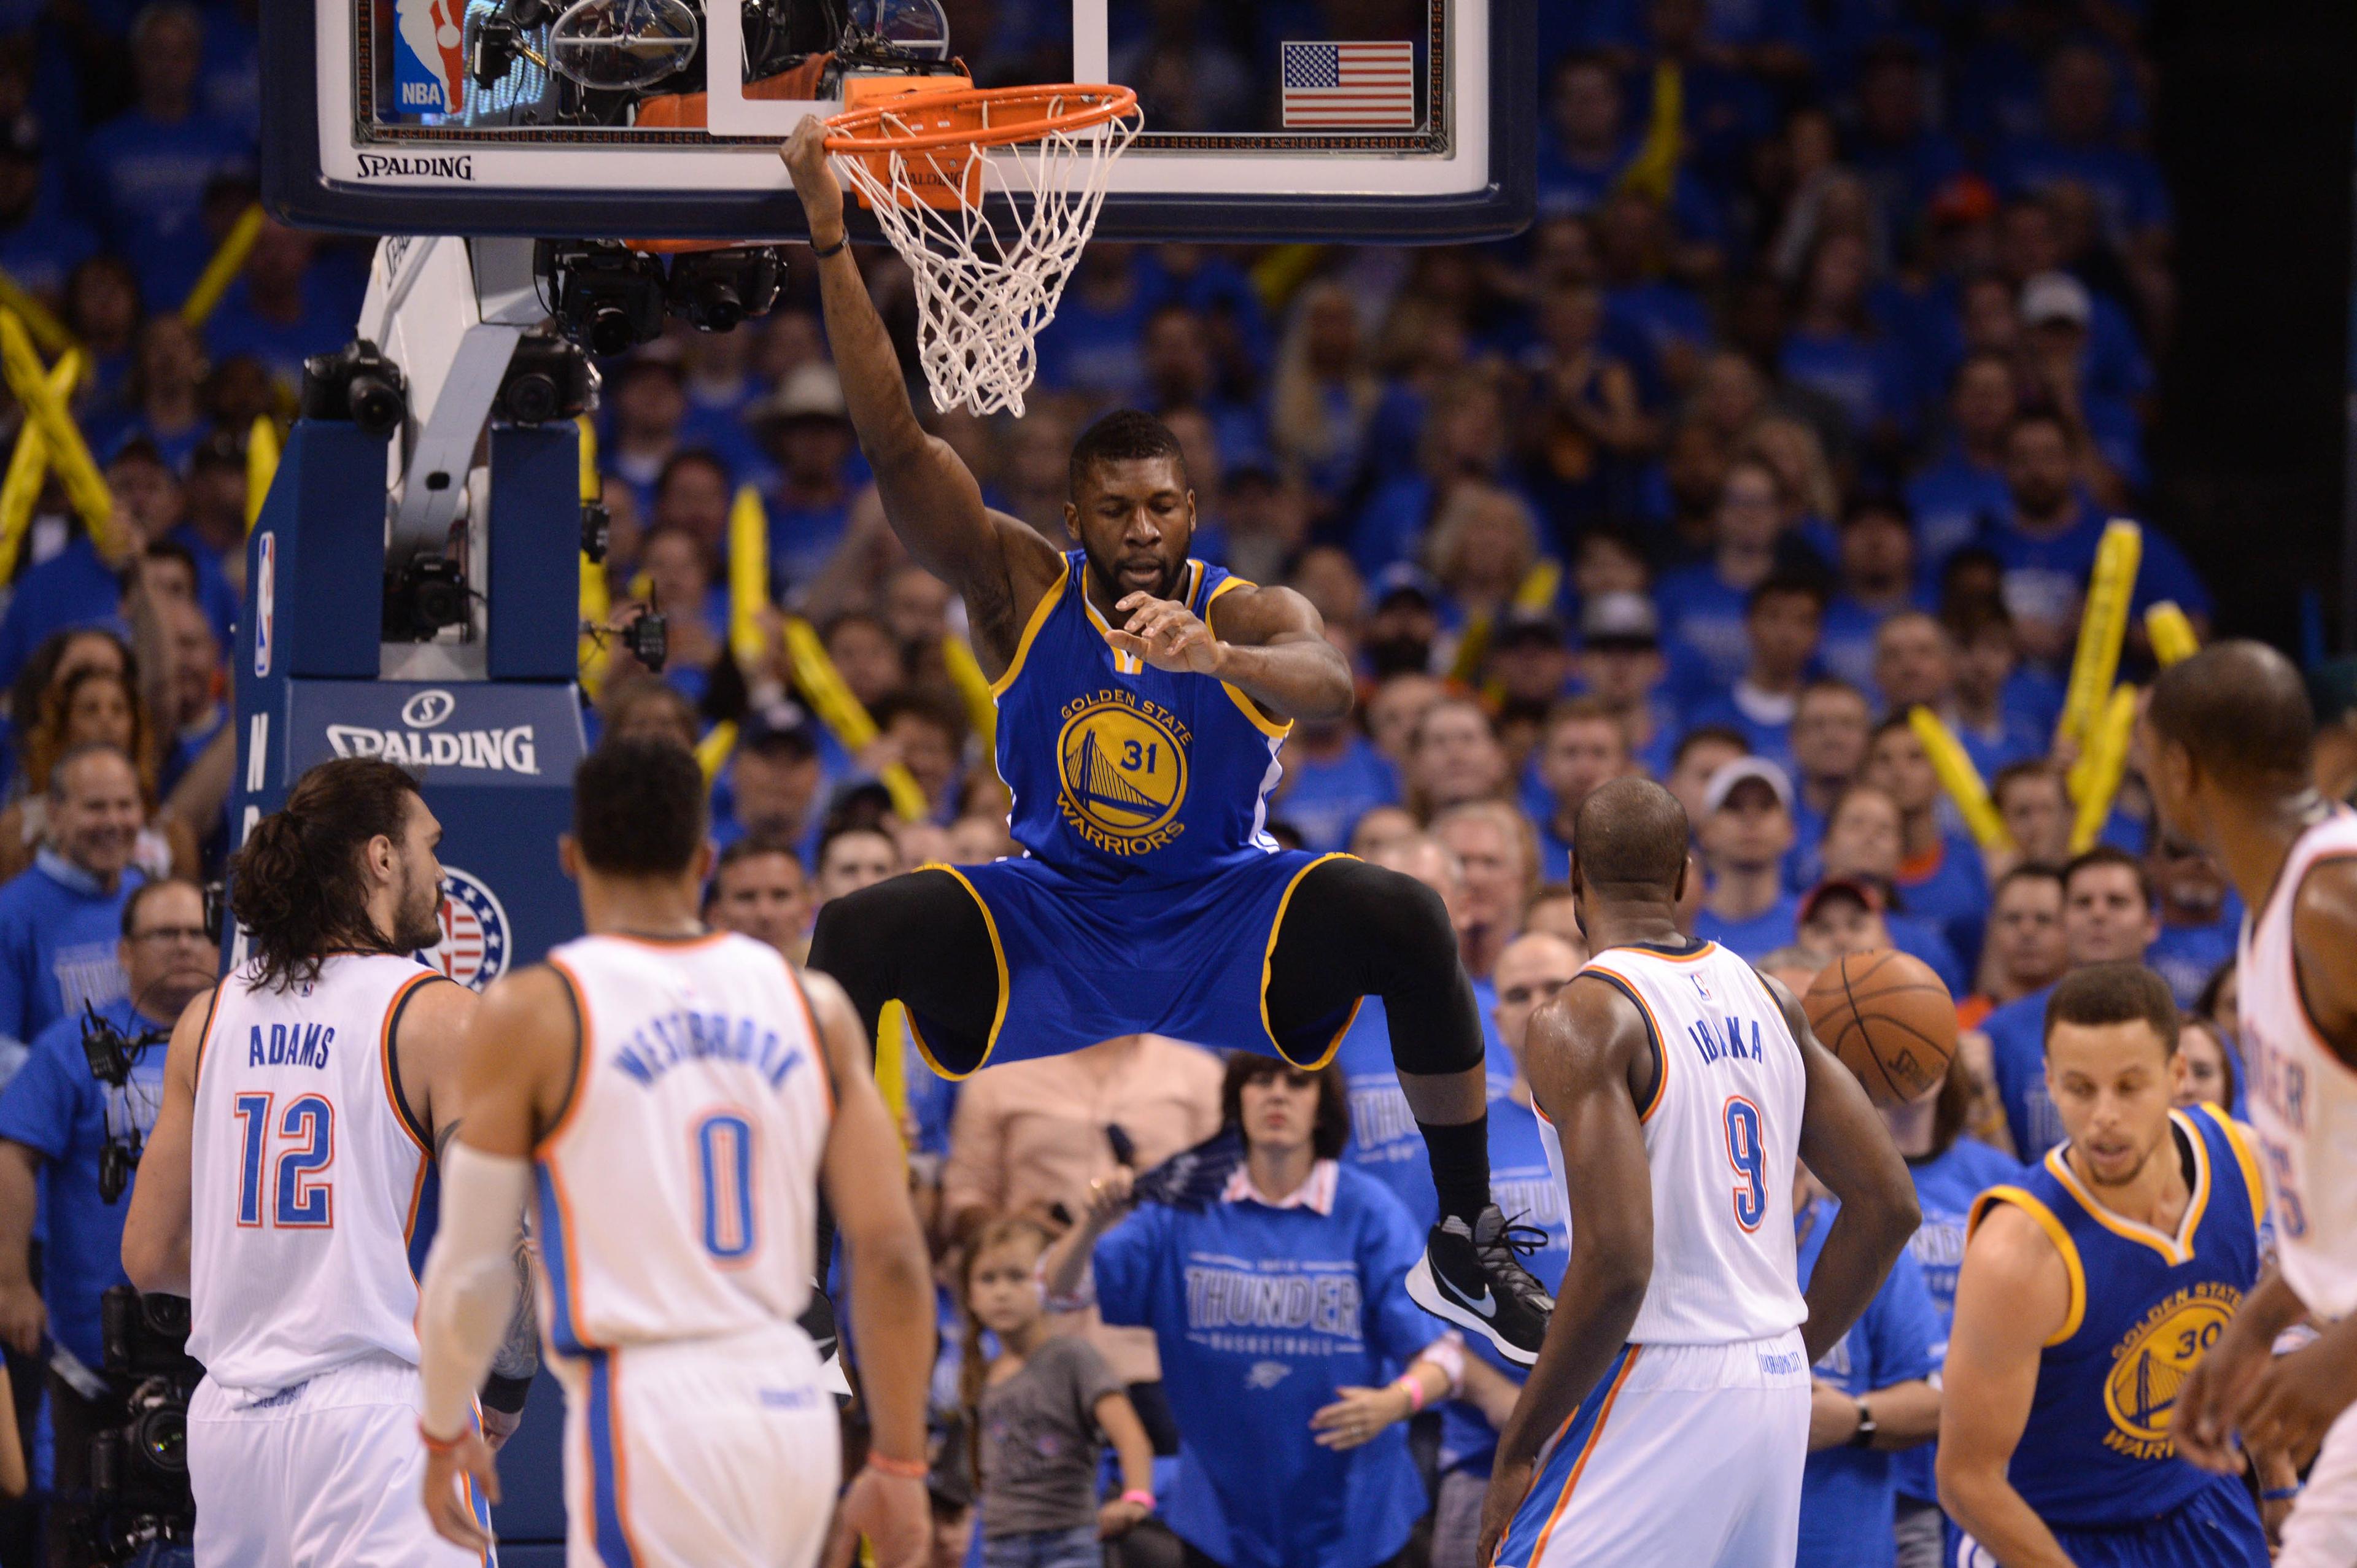 May 28, 2016; Oklahoma City, OK, USA; Golden State Warriors center Festus Ezeli (31) hangs from the rim after a dunk against the Oklahoma City Thunder during the first quarter in game six of the Western conference finals of the NBA Playoffs at Chesapeake Energy Arena. Mandatory Credit: Mark D. Smith-USA TODAY Sports / Mark D. Smith-USA TODAY Sports